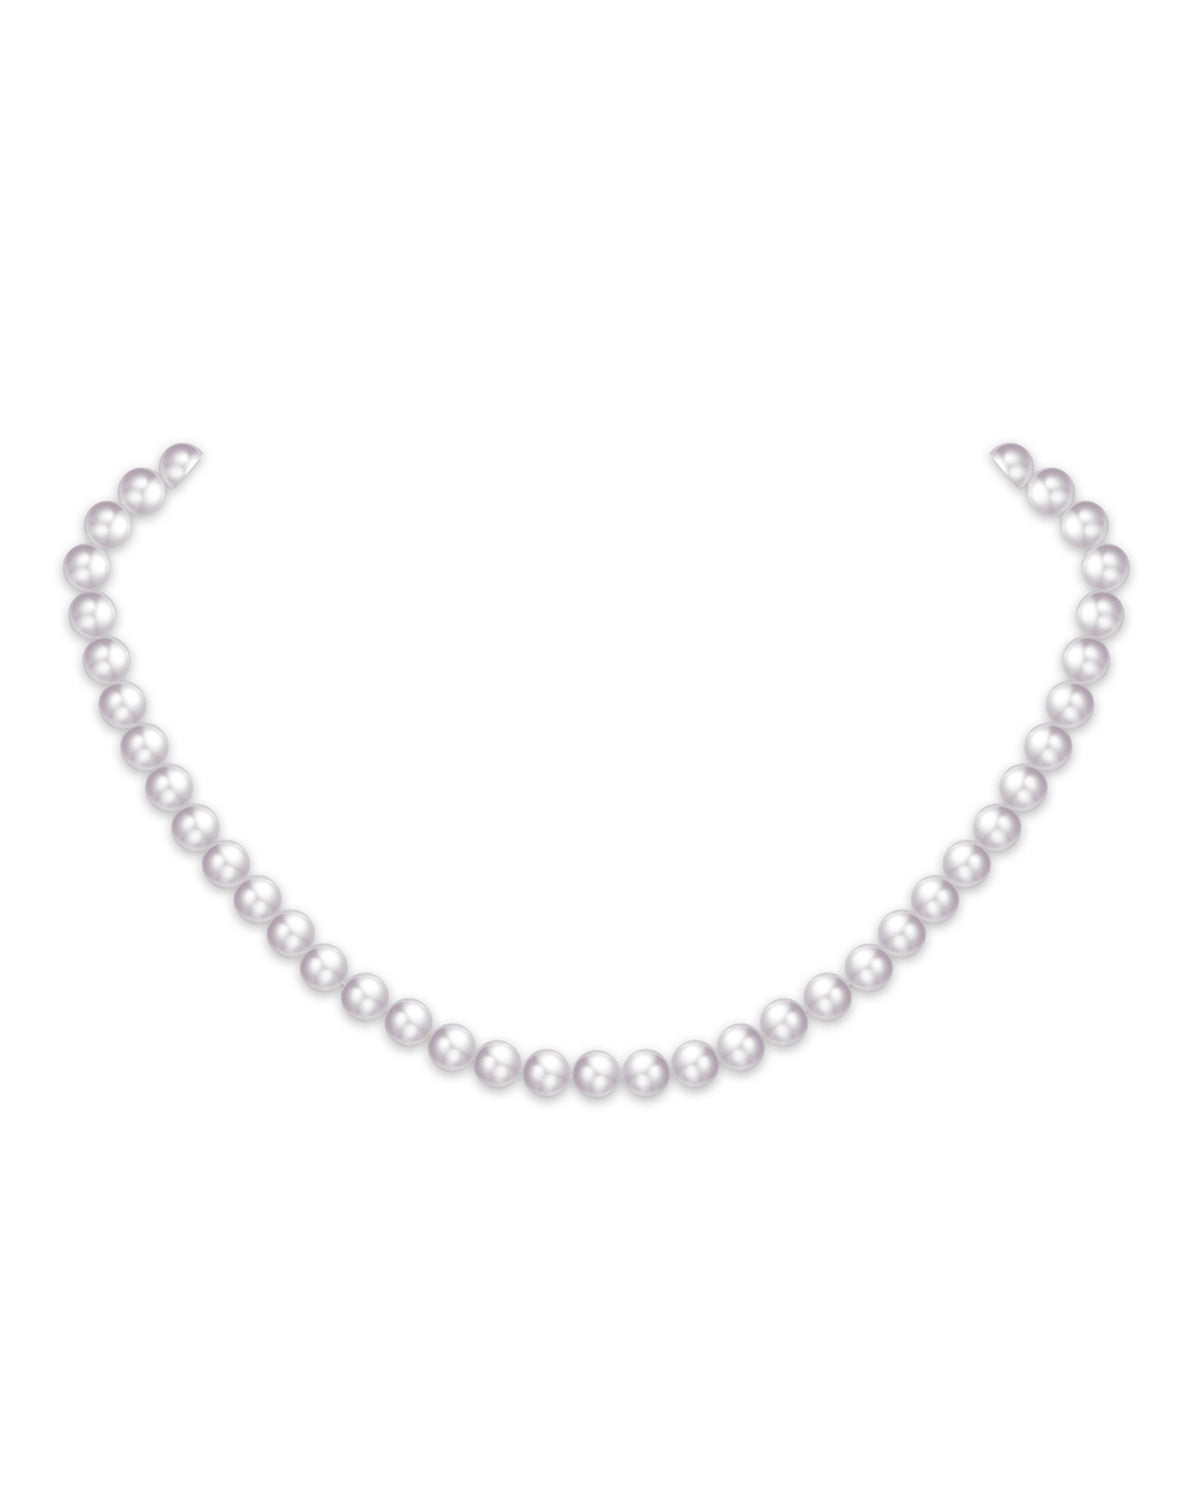 5.5-6.5mm Japanese Akoya White Pearl Necklace- AA+ Quality